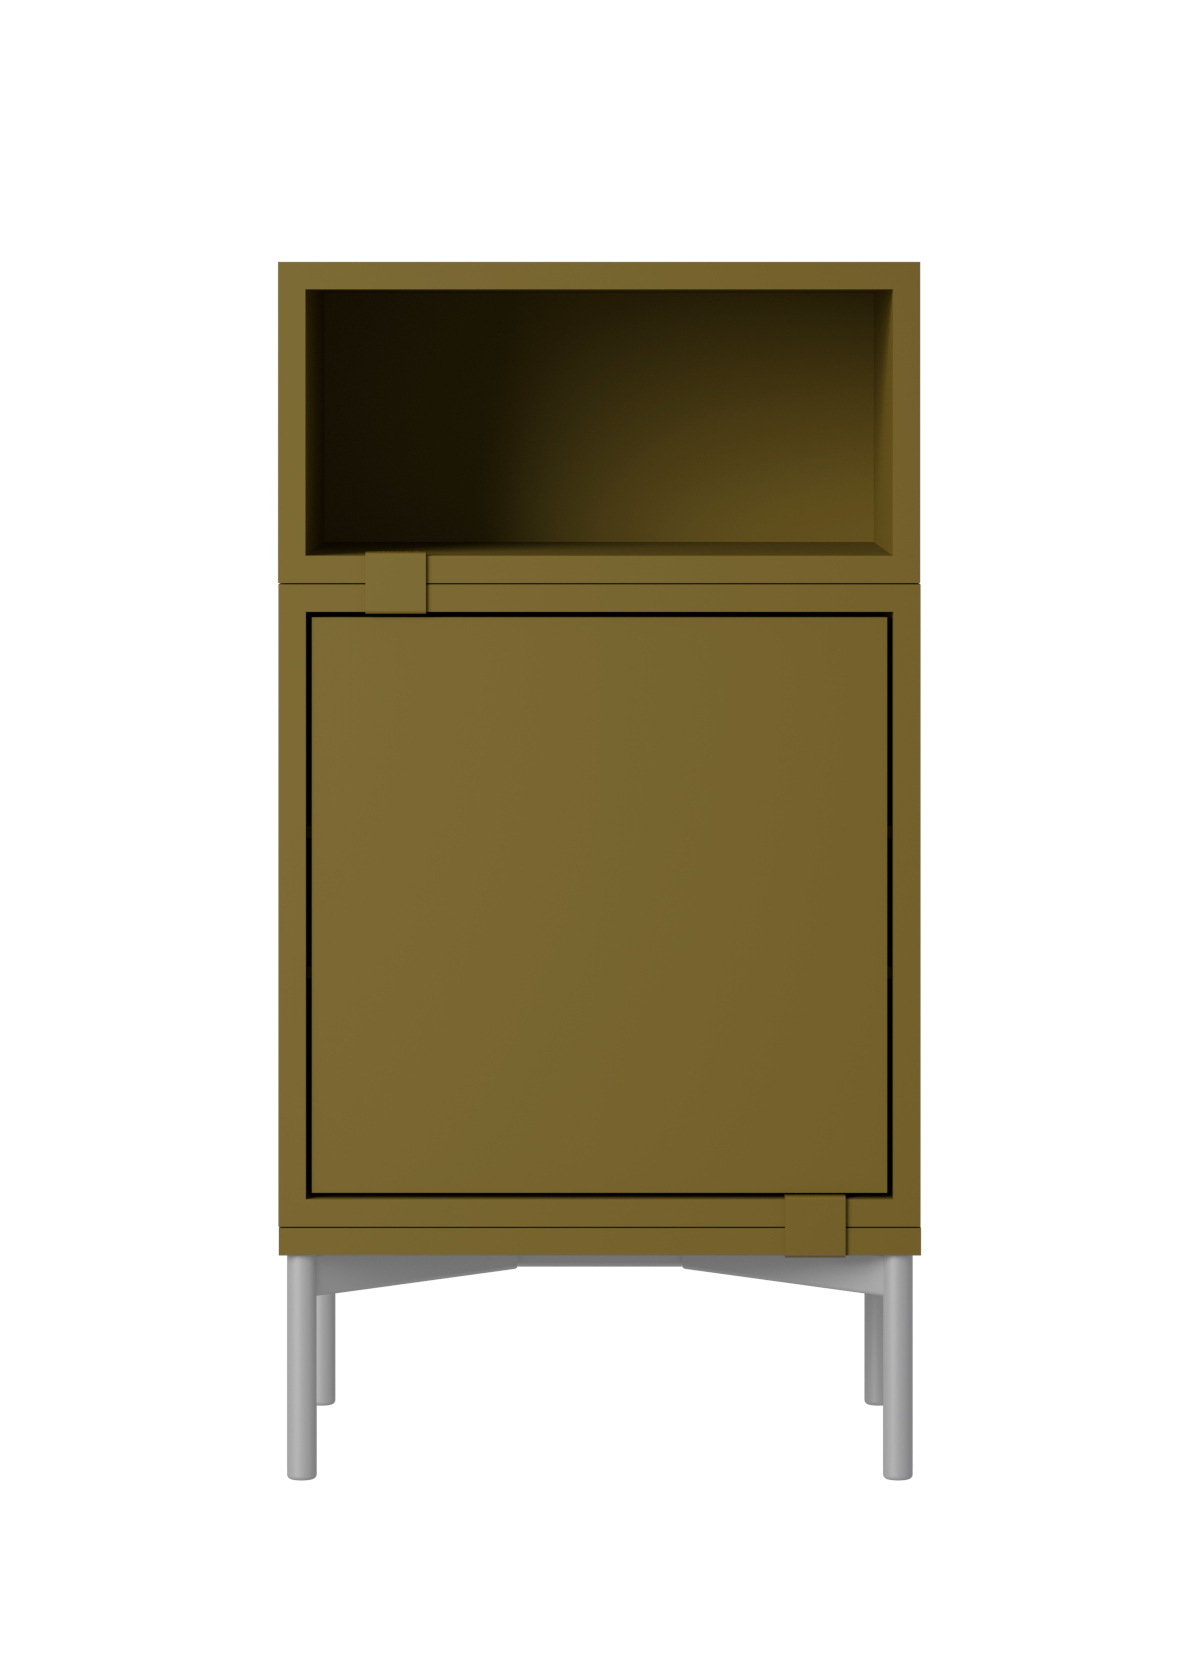 Stacked Storage Bedside Table - Configuration 2, brown green